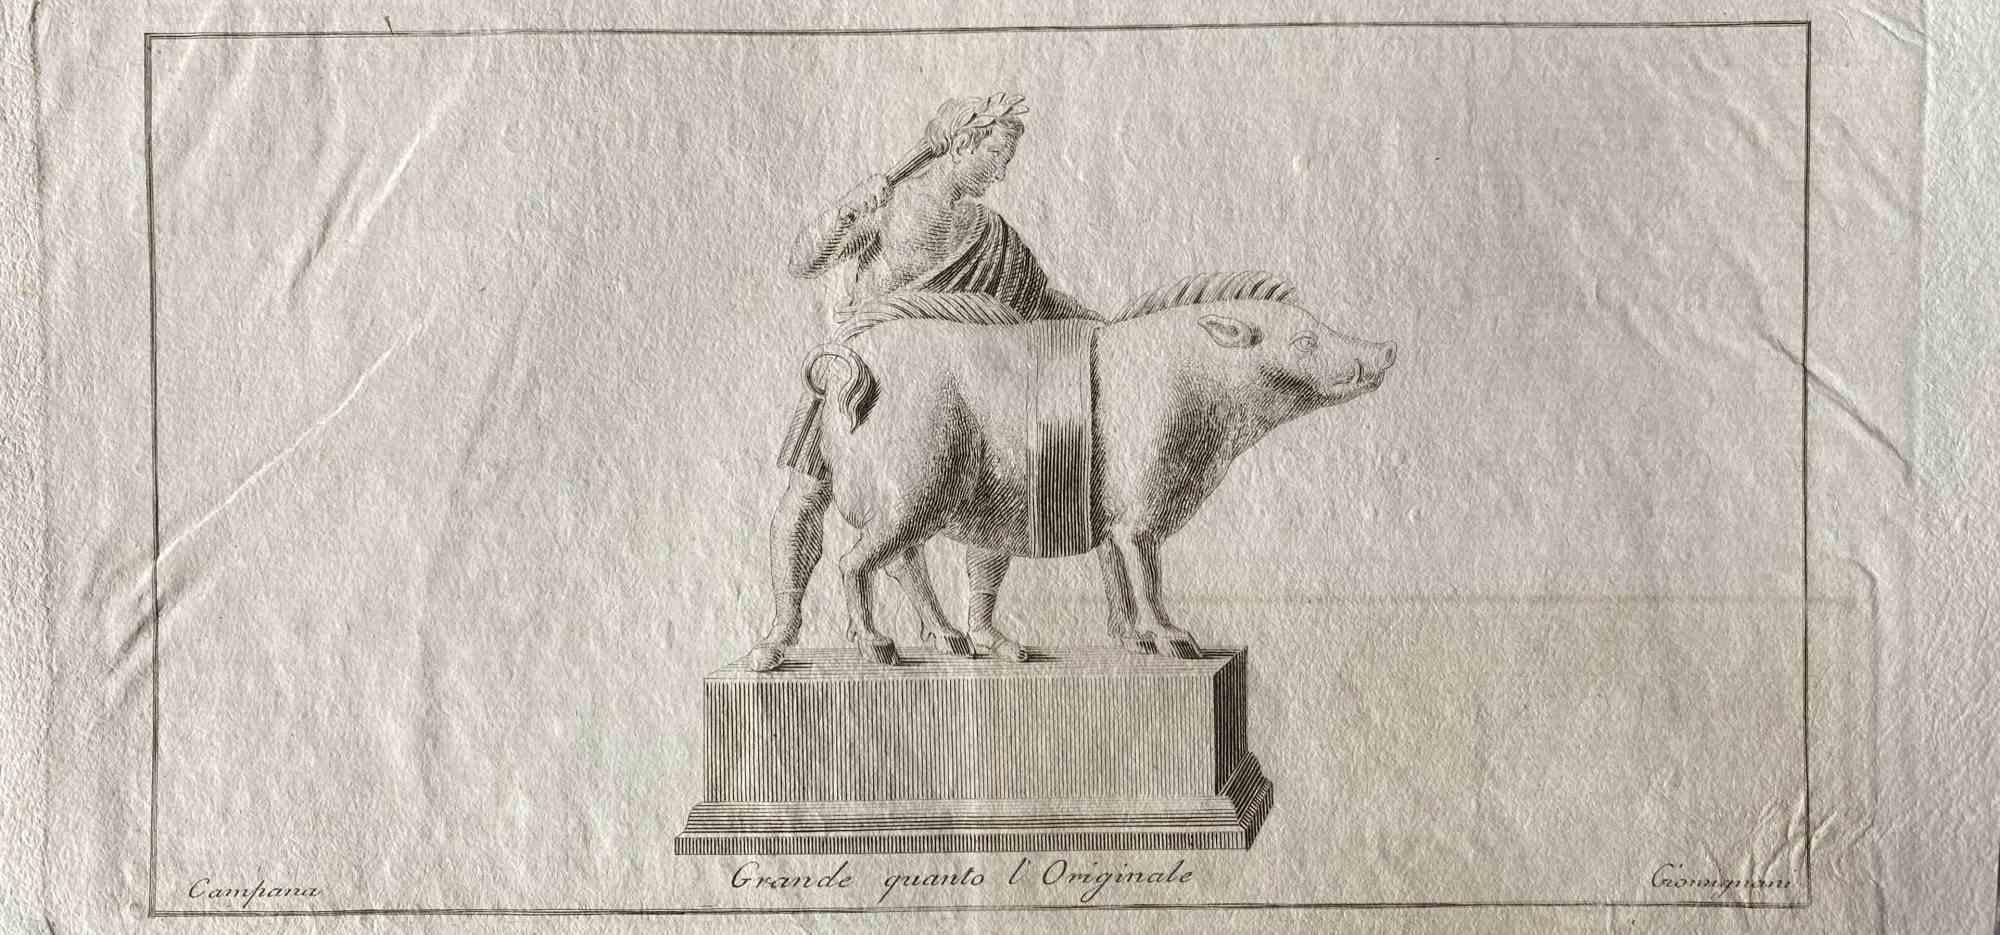 Animal Figures Animal Figures from Ancient Rome, From the Series "Antiquities of Herculaneum Exposed", original etching from the end of the 18th century, made by Various Old Masters.

In very good condition, except for some stains along the